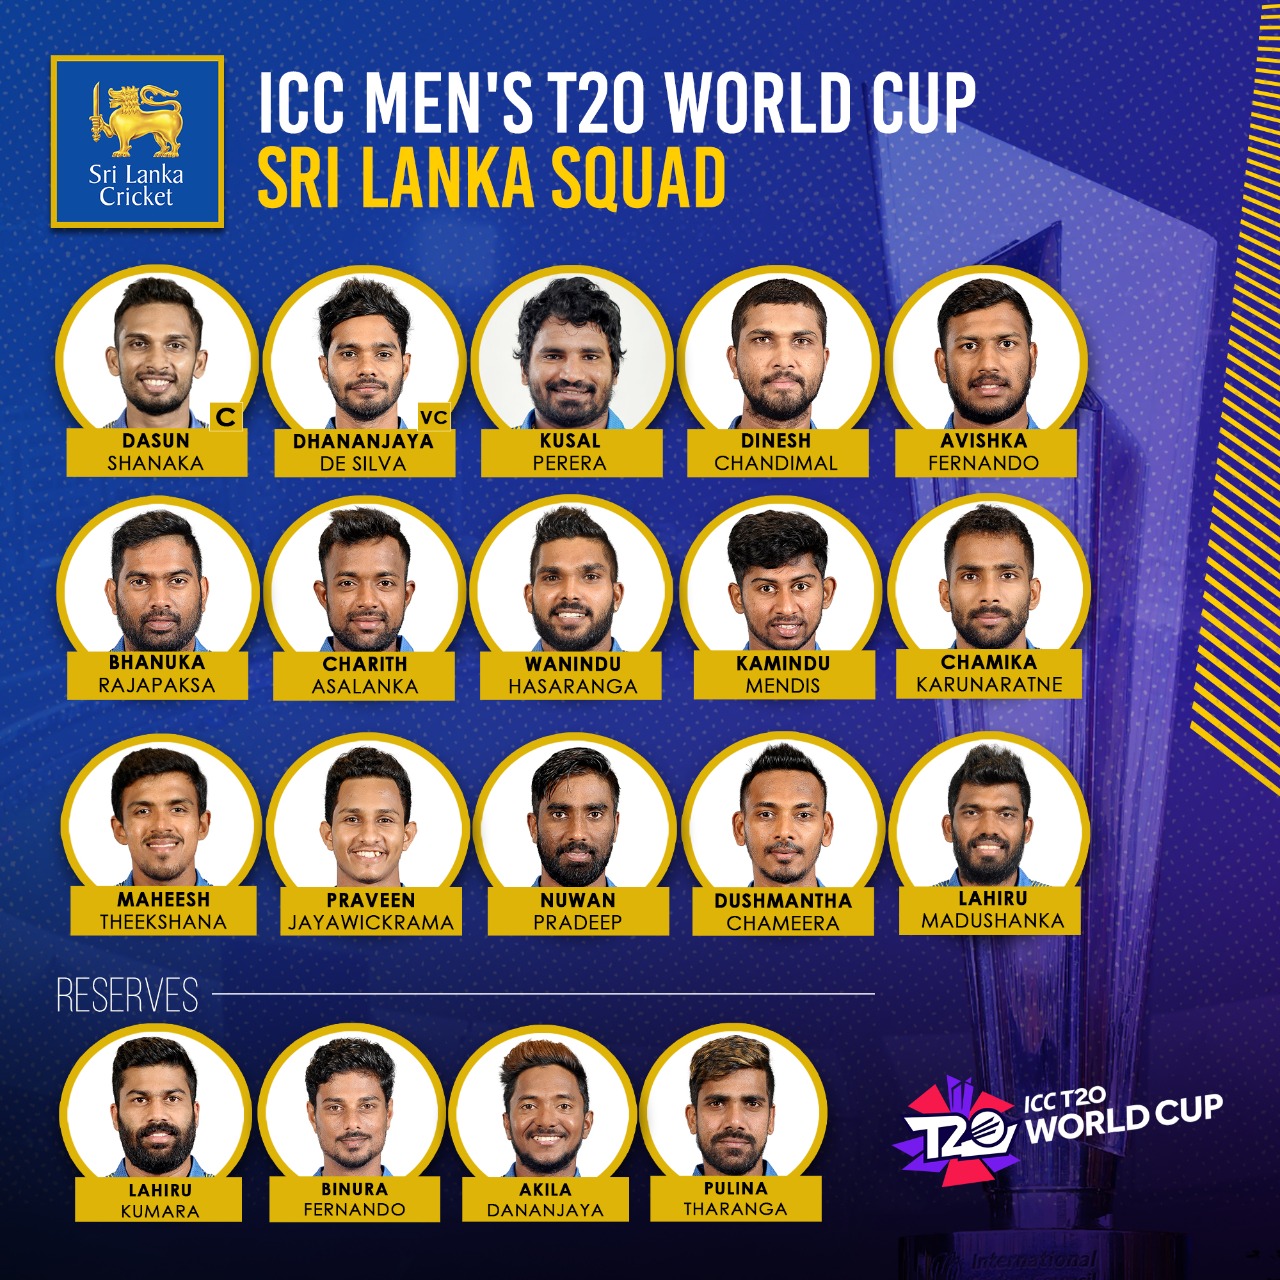 Sri Lanka squad for the ICC Mens T20 World Cup 2021